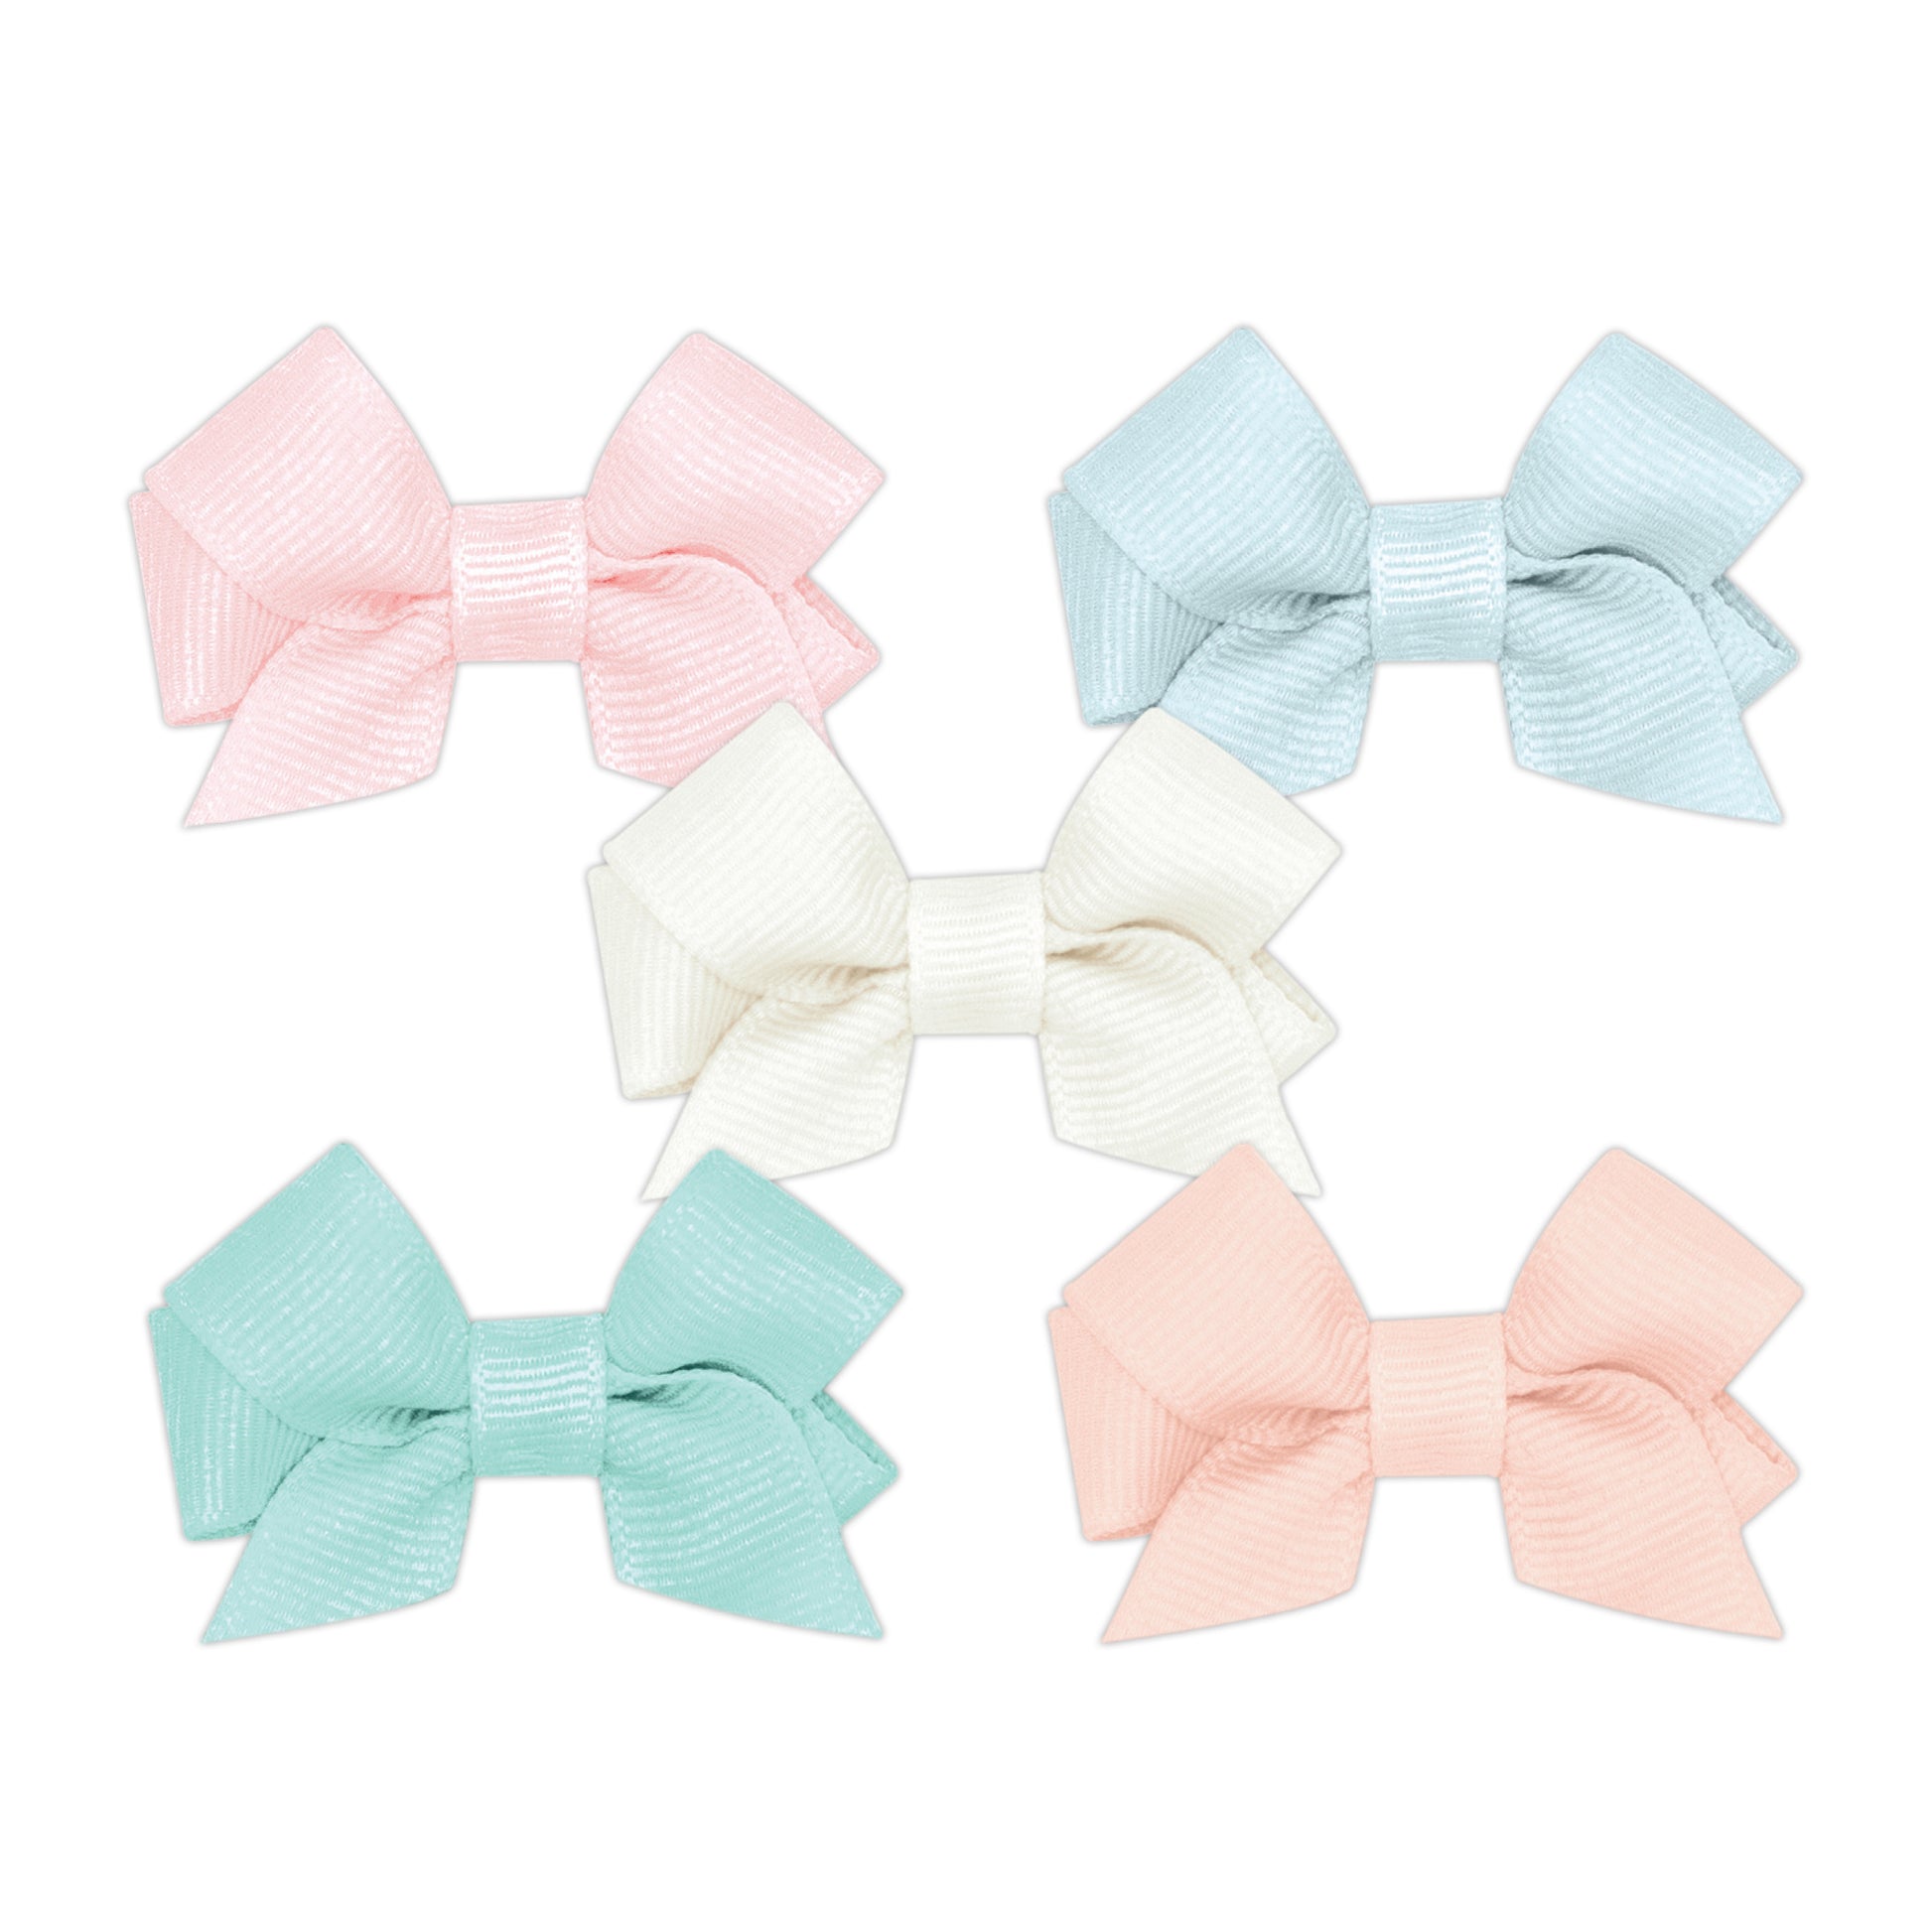 5 Pack Tiny Bow Multi Pack - Soft Pastels Kids Hair Accessories Wee Ones   